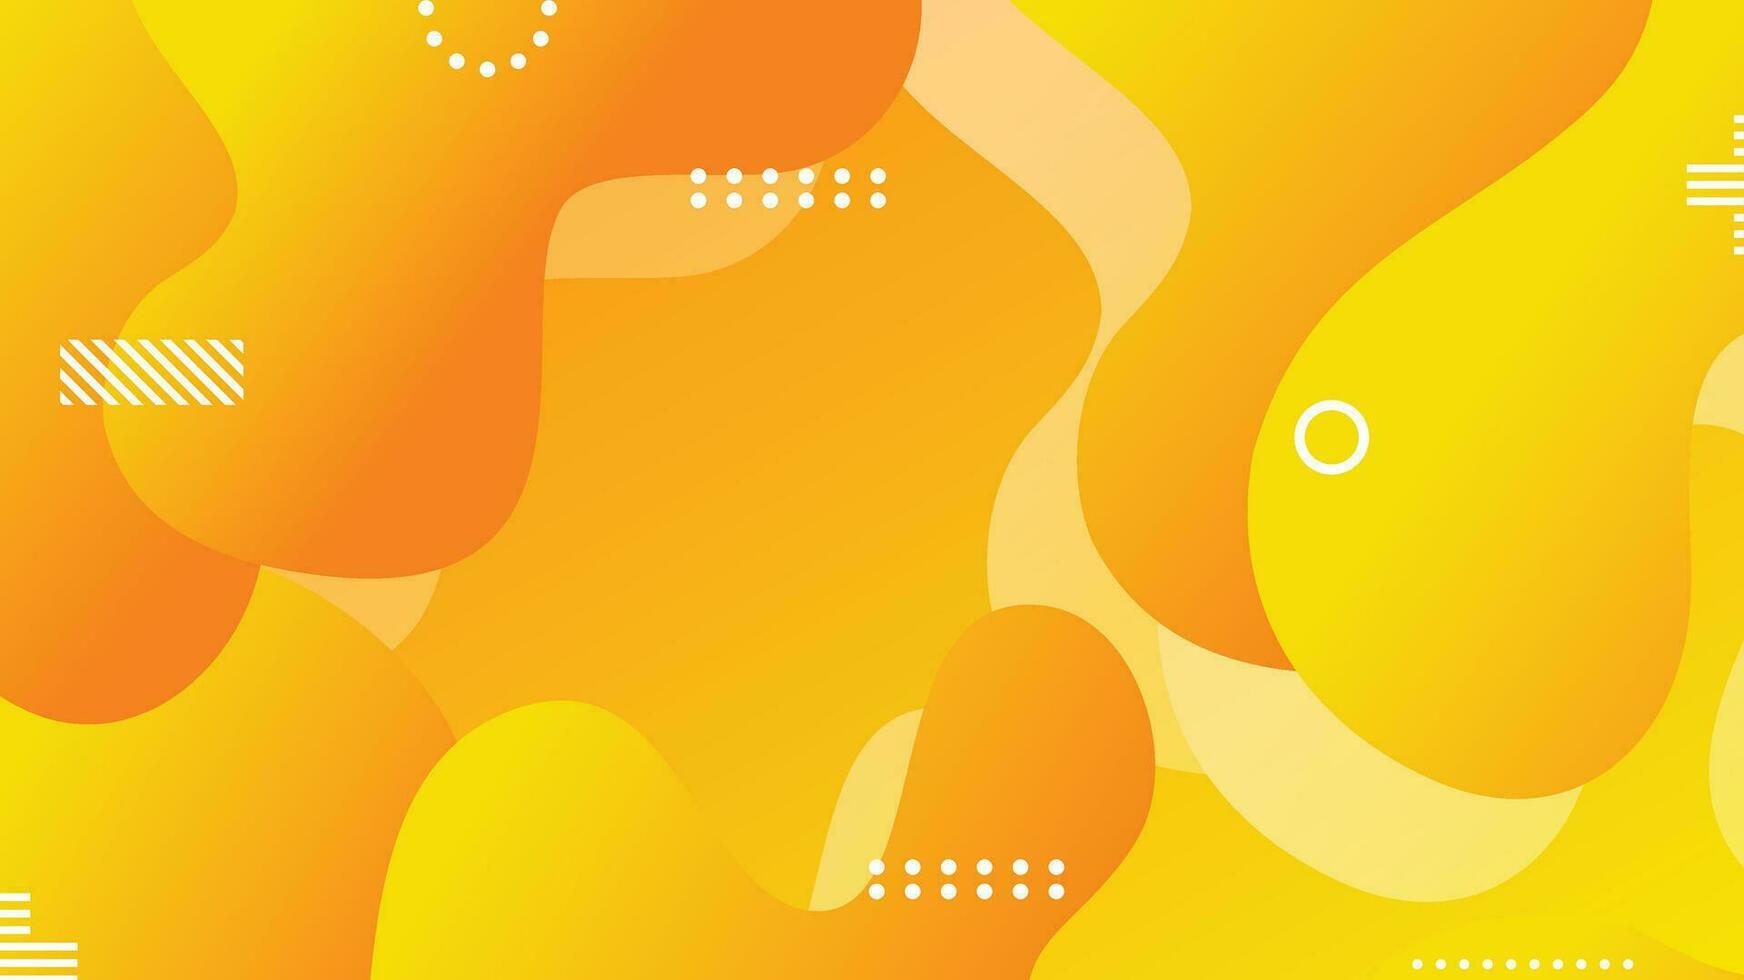 Yellow orange gradient dynamic fluid shapes abstract background vector